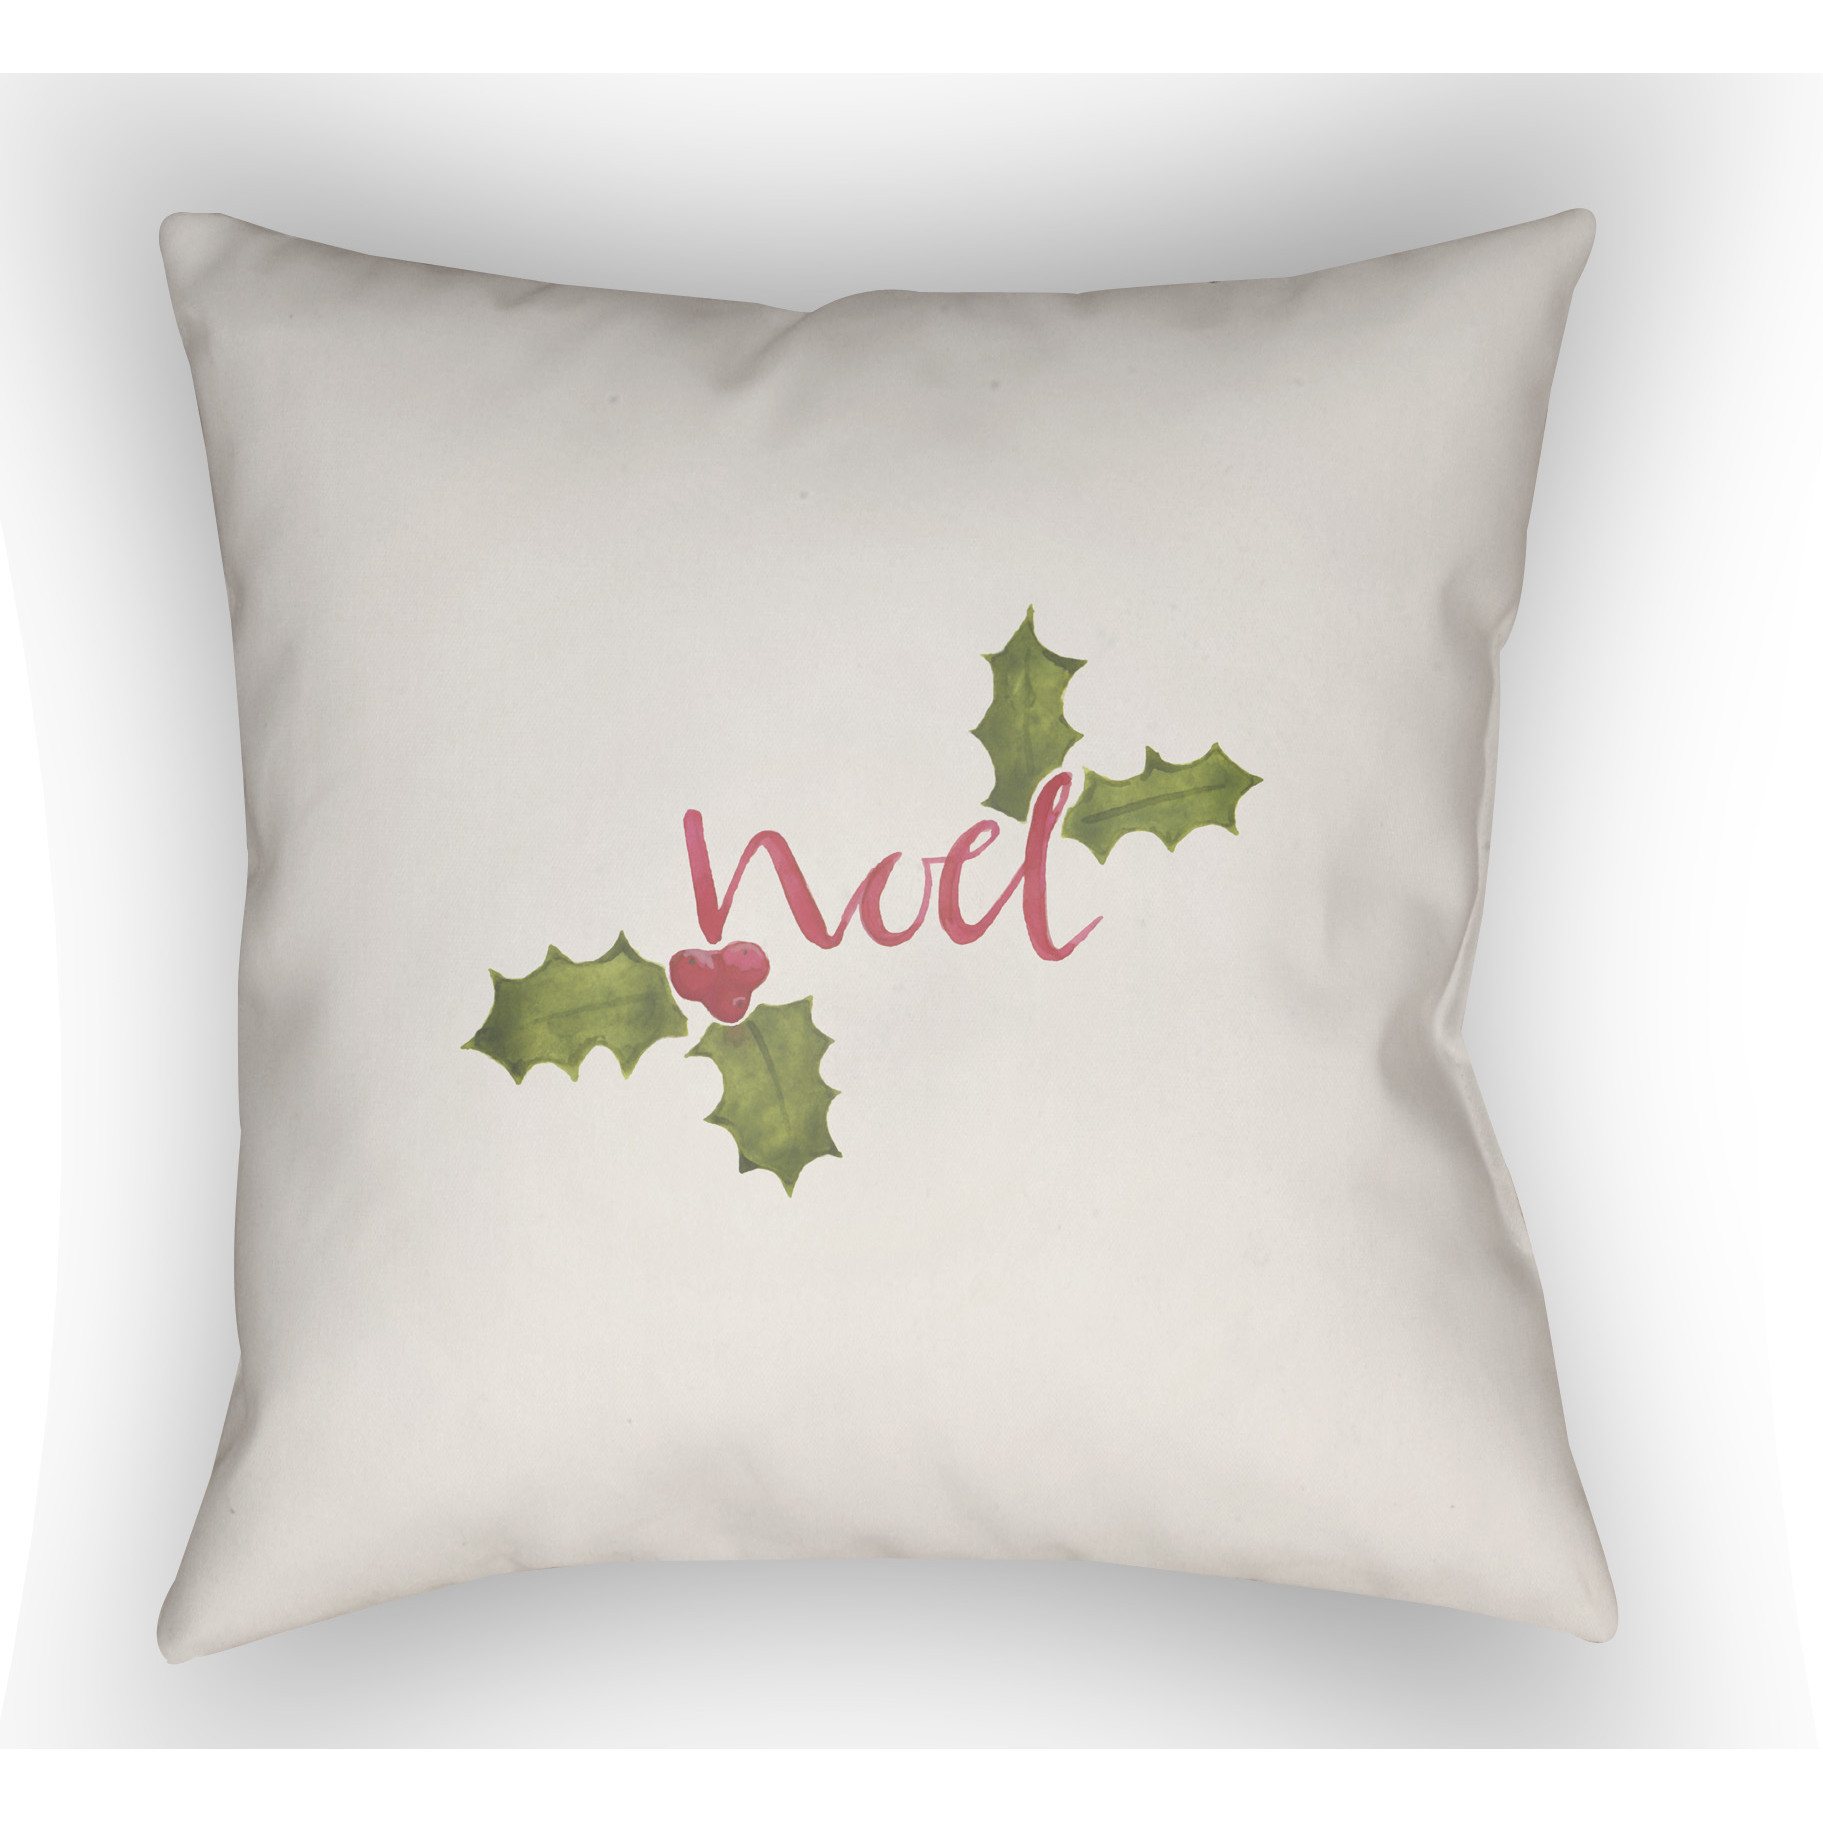 Outdoor Christmas Pillows
 The Holiday Aisle Noel Indoor Outdoor Throw Pillow